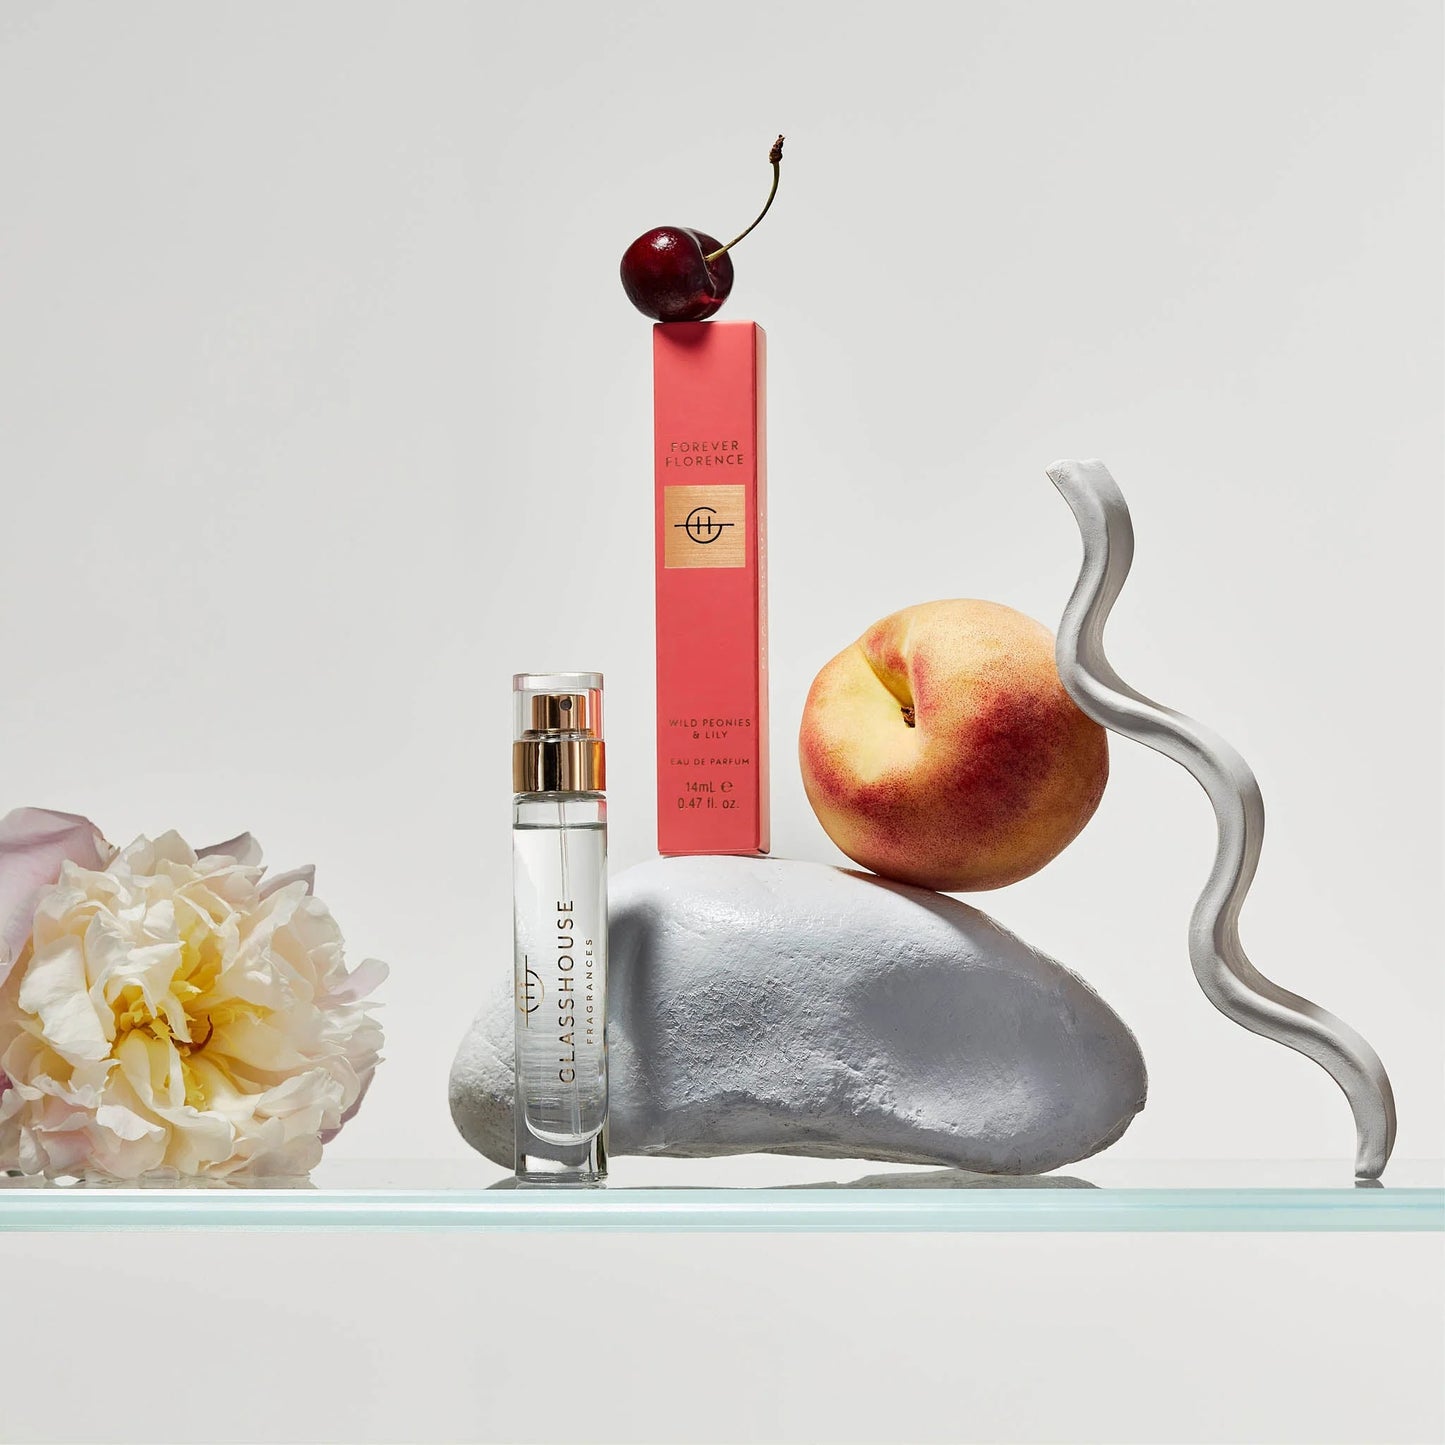 Forever Florence Eau De Parfum and its box arranged with a flower, a cheery, and a peach on a rock.